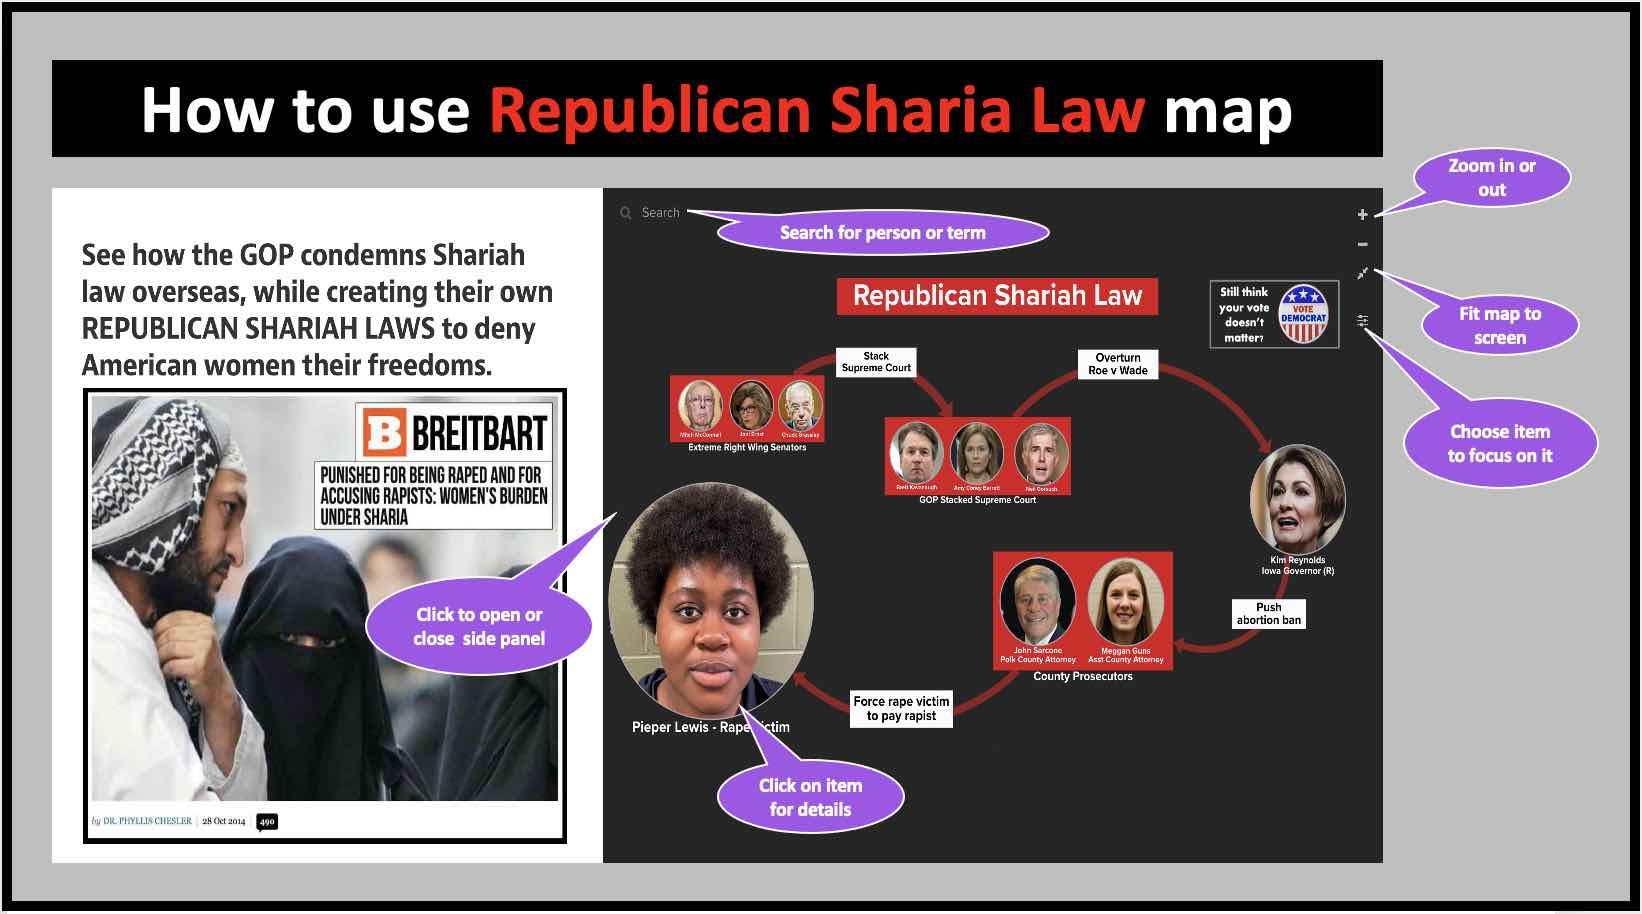 How to use the Republican Sharia Law map